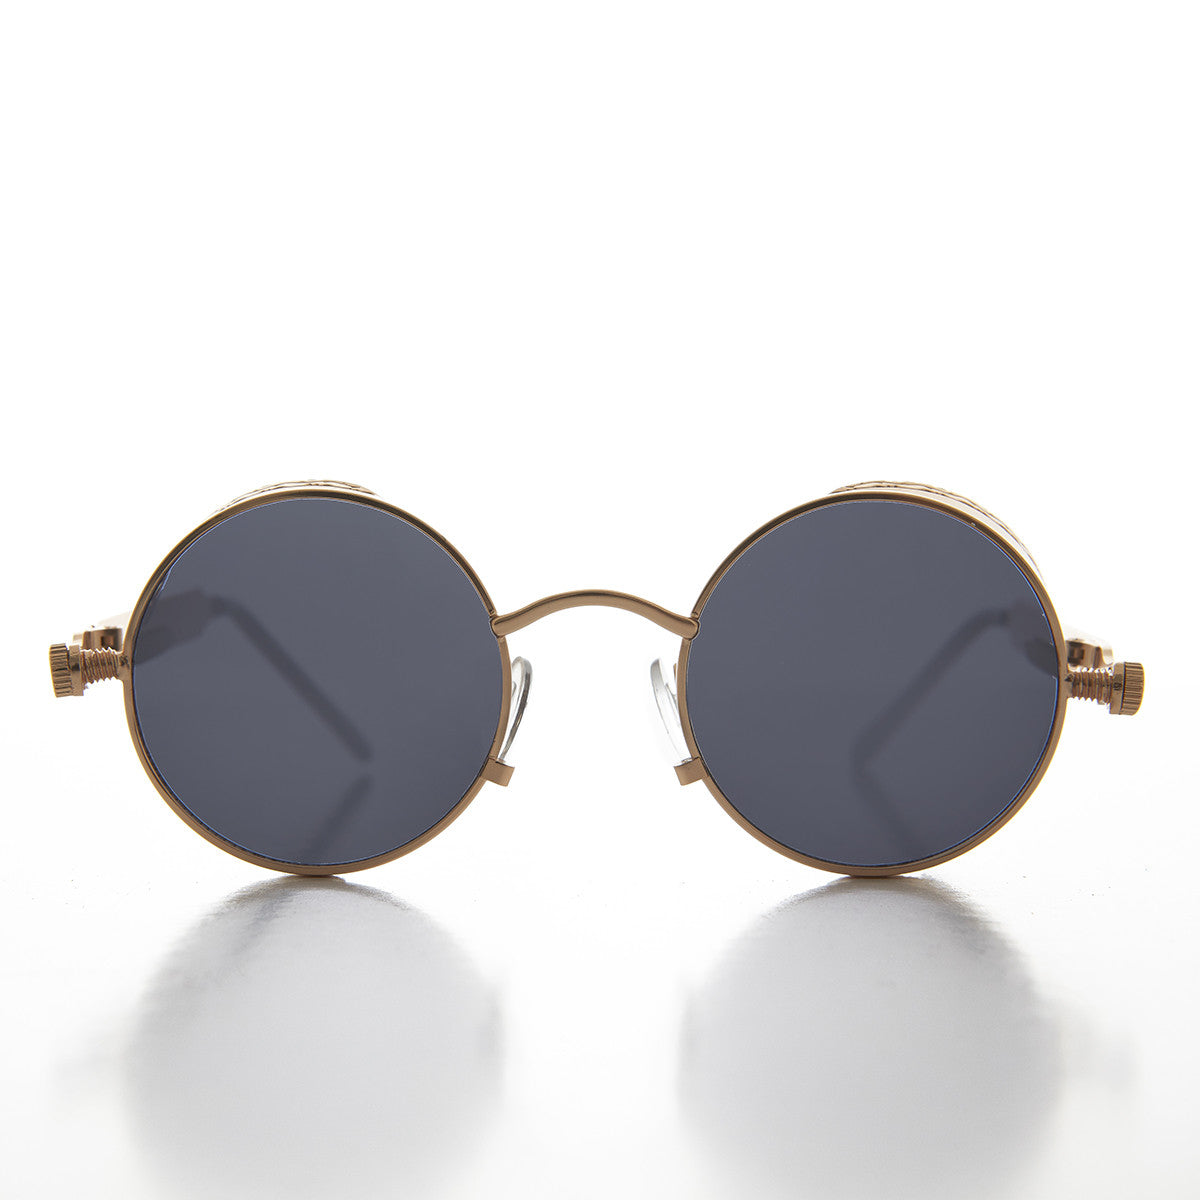 Gold Round Steampunk Goggle Sunglass with Spring Temples - Orwell 1